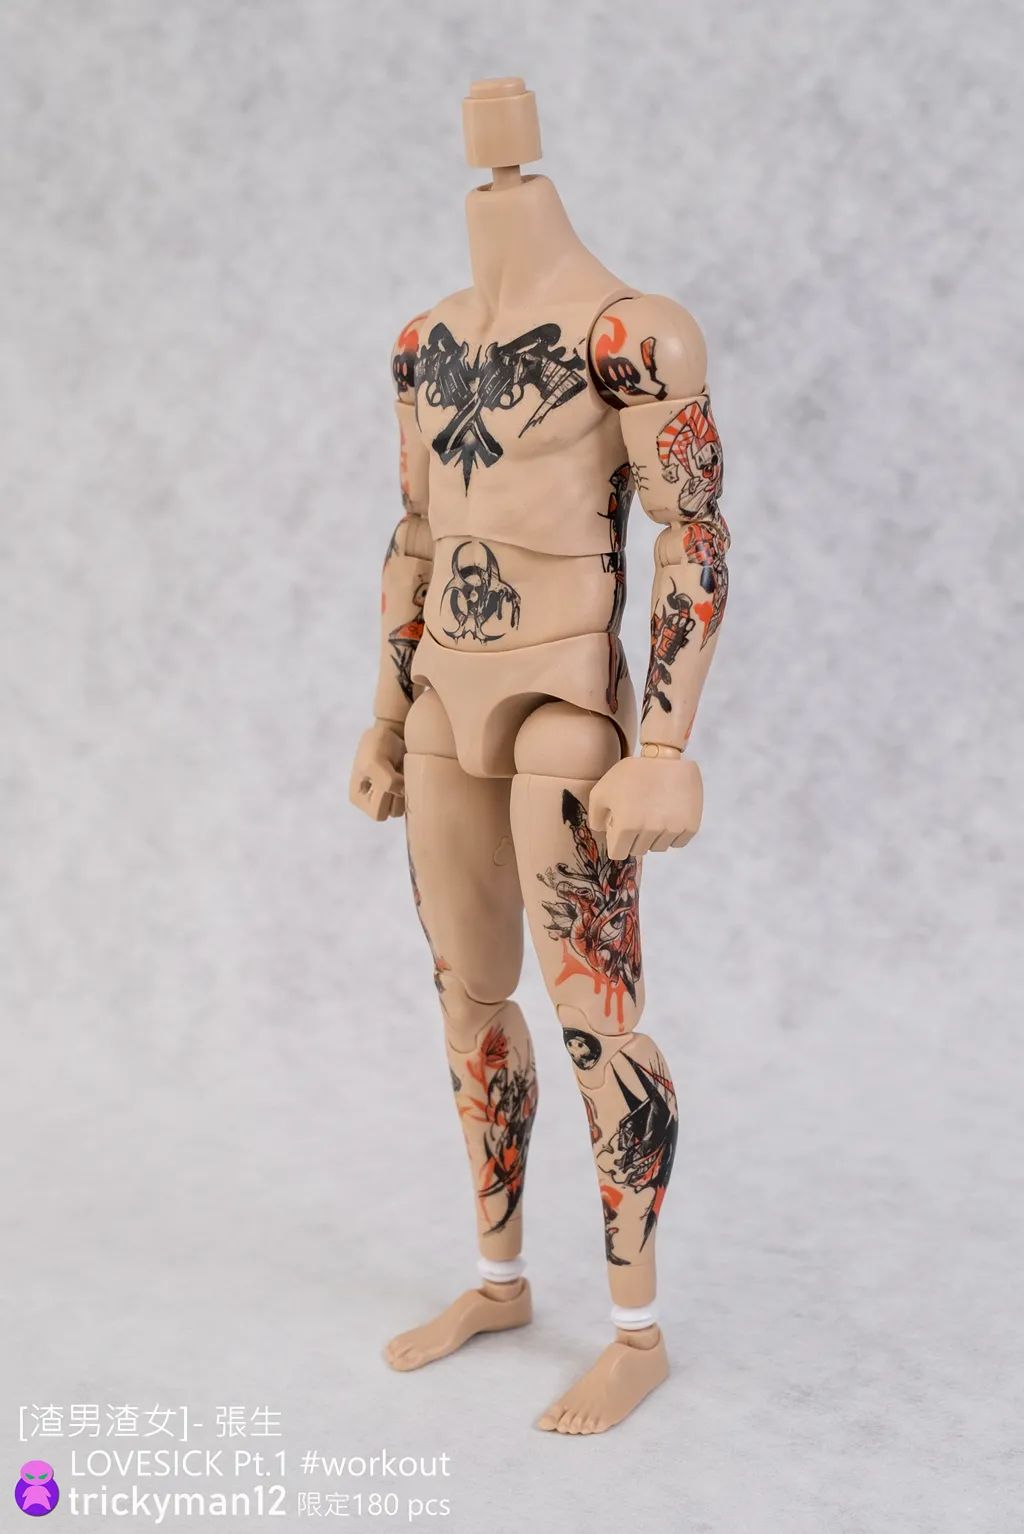 NEW PRODUCT: Trickyman12: 1/6 "Scumbag" series - Zhang Sheng LOVESICK Pt.1 action figure 17562611